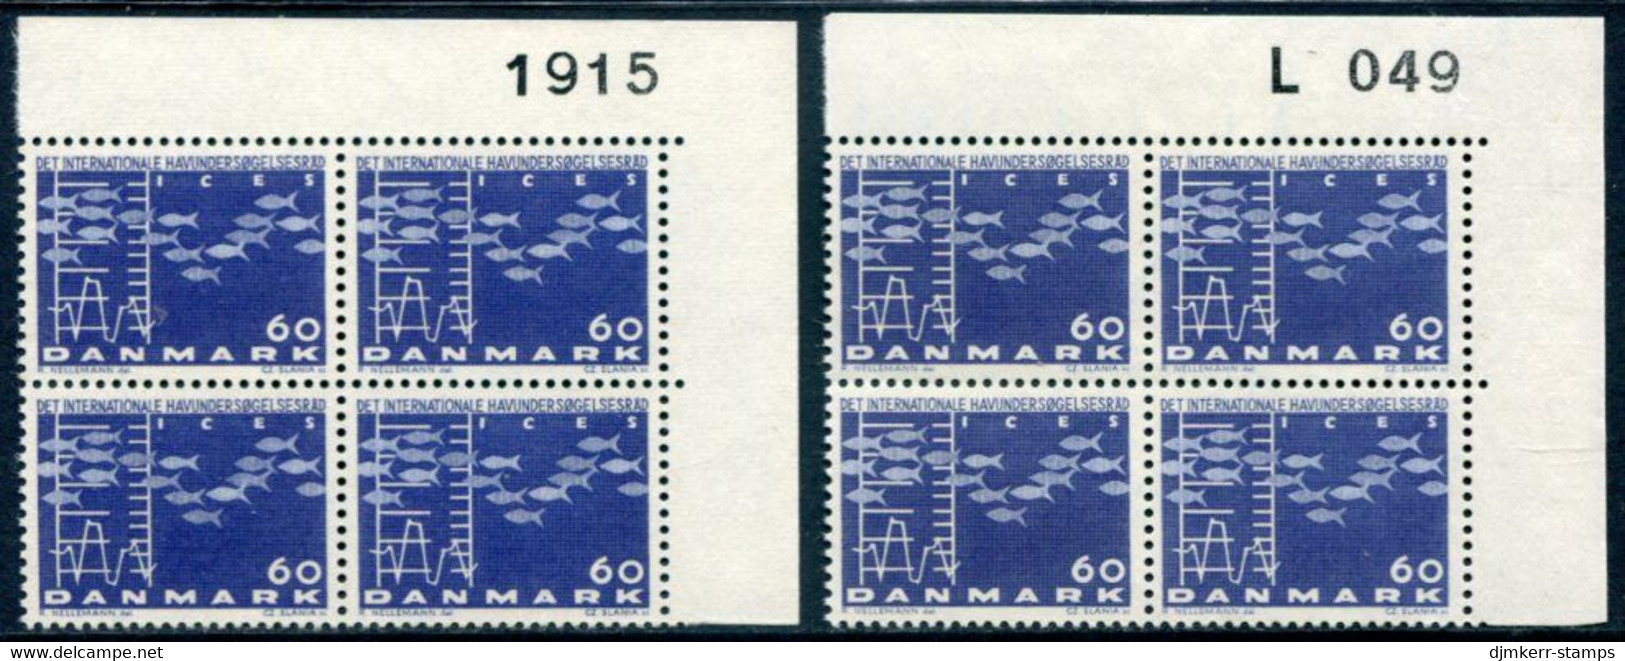 DENMARK 1964 Maritime Research Both Papers In Blocks Of 4 With Control Number MNH / **. Michel 423x,y - Neufs